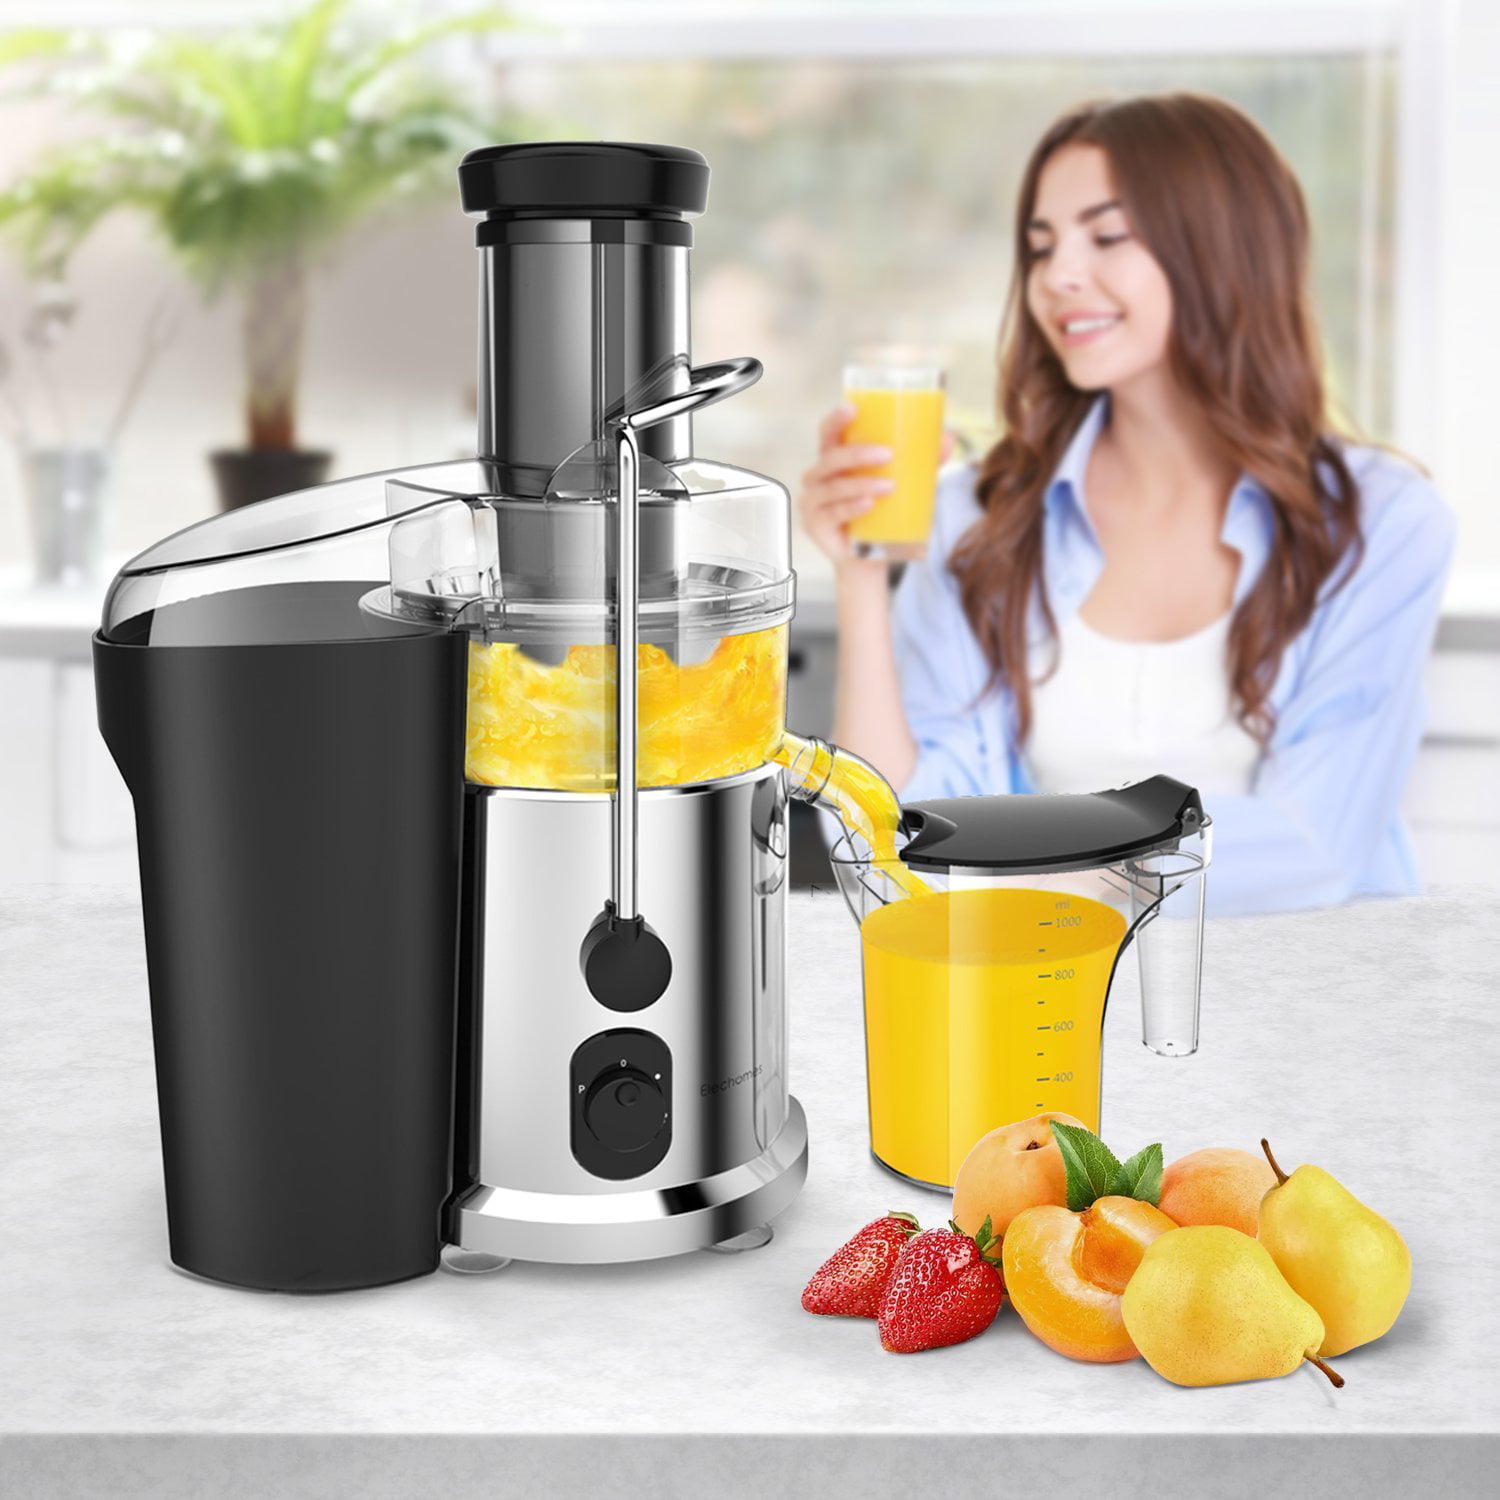 Elechomes 900W Centrifugal Juicer Mixer for Fruits/Vegetable 22,000R ...